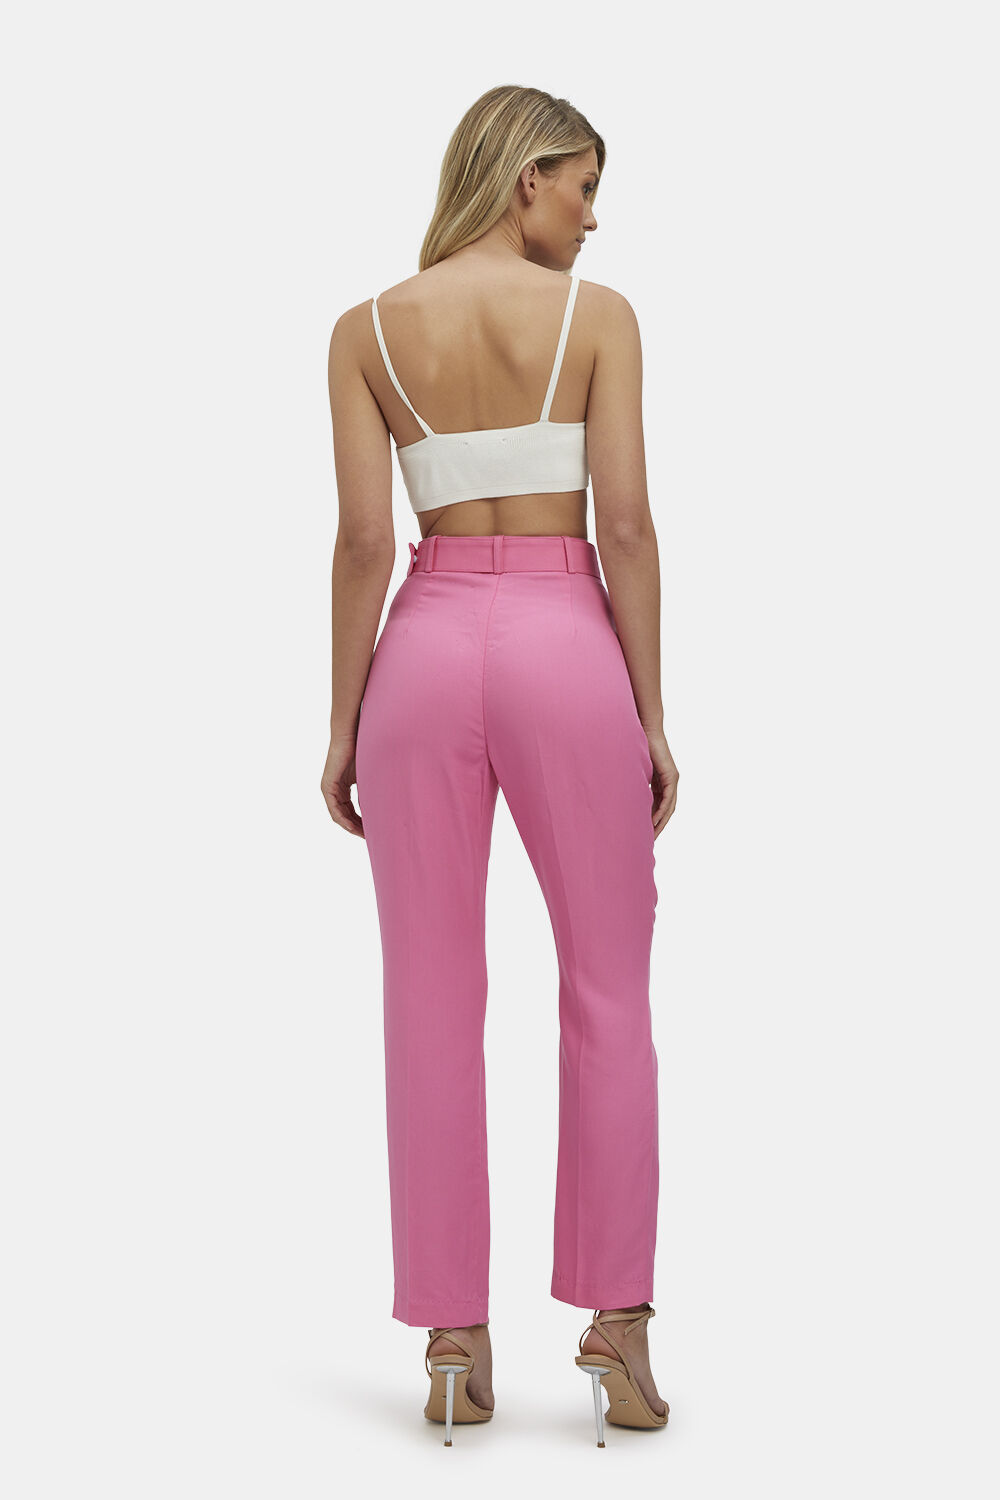 THERESE BUCKLE PANT in colour SACHET PINK